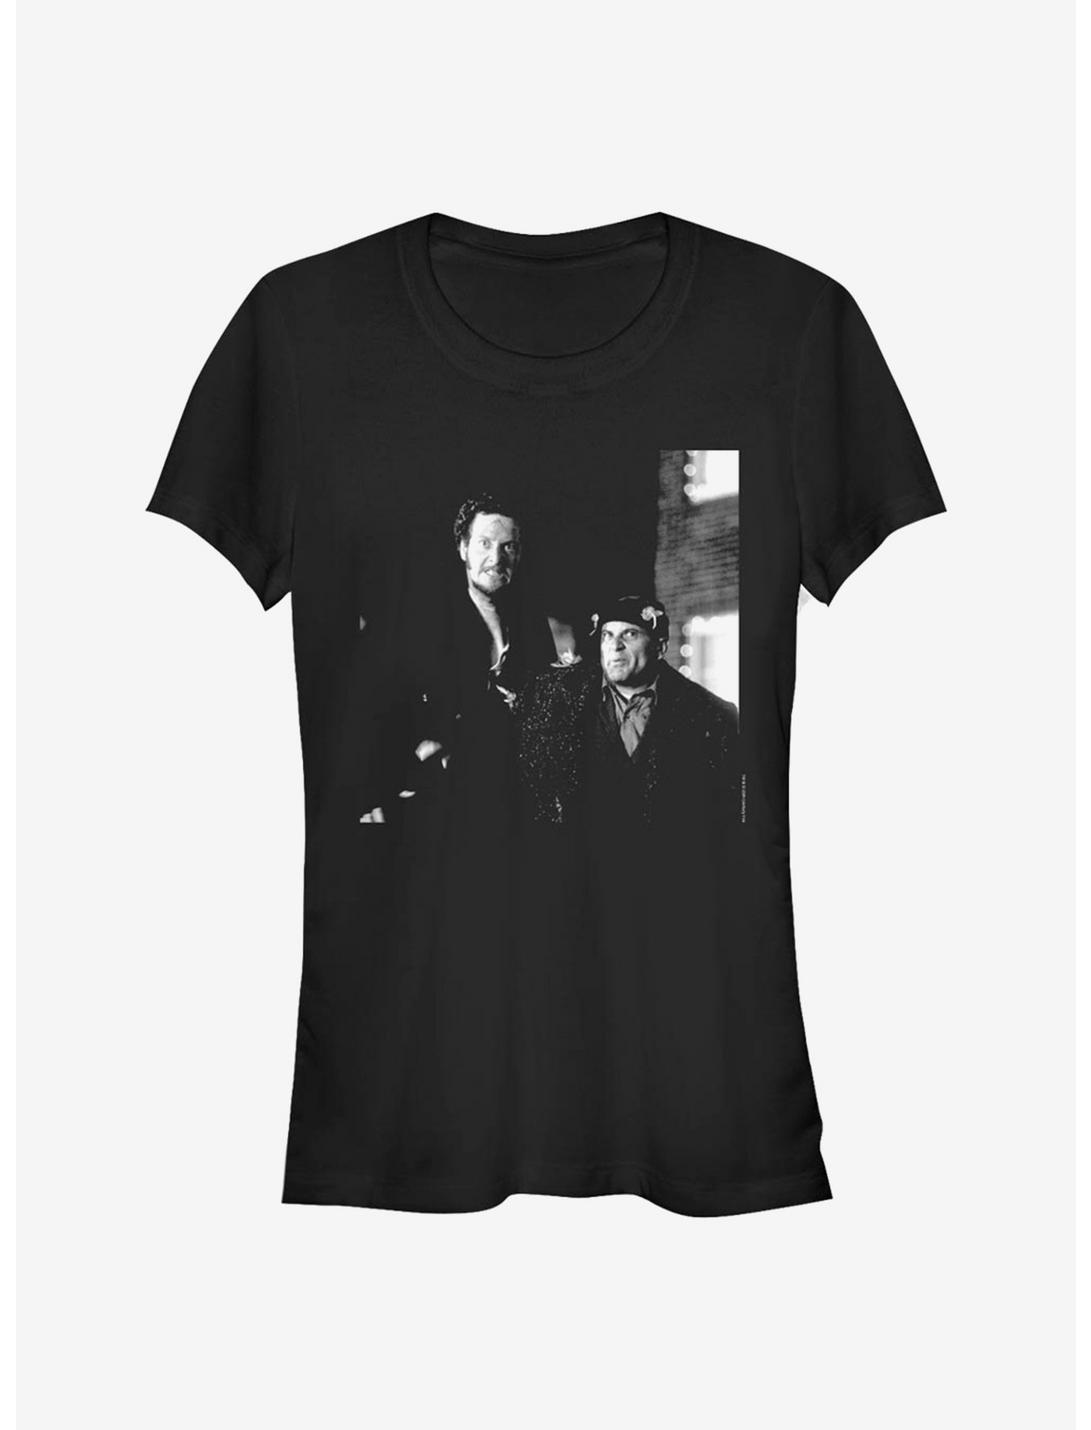 Home Alone Harry And Marv Photo Girls T-Shirt, BLACK, hi-res